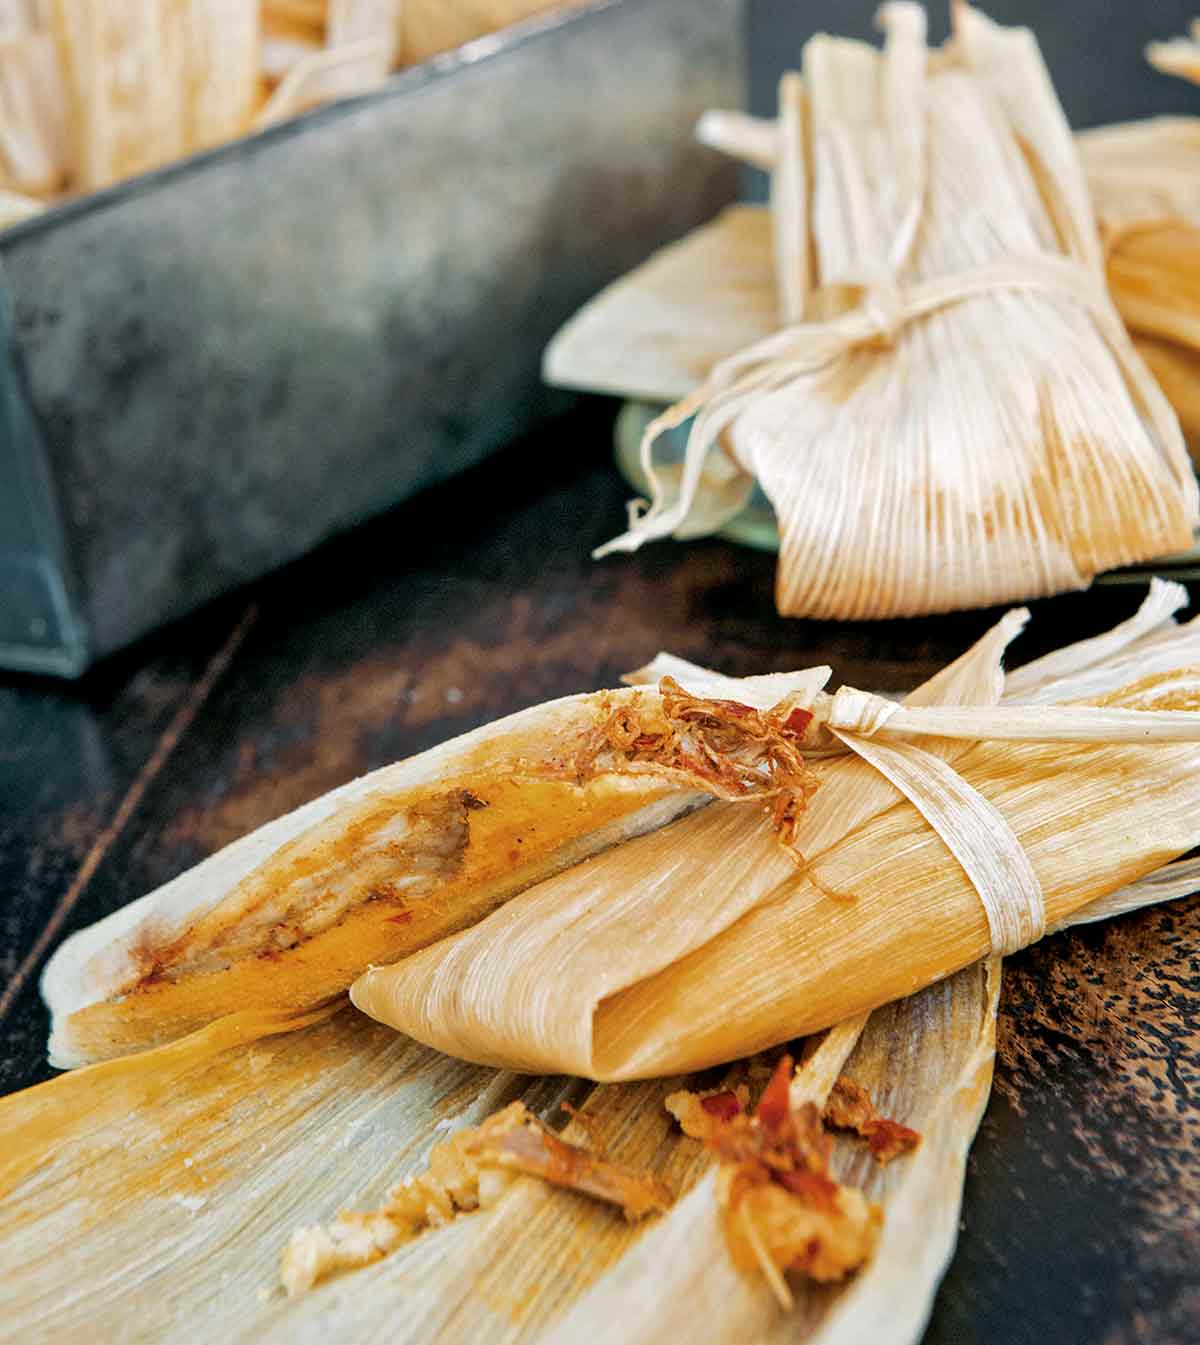 Several tamales on a wooden table.